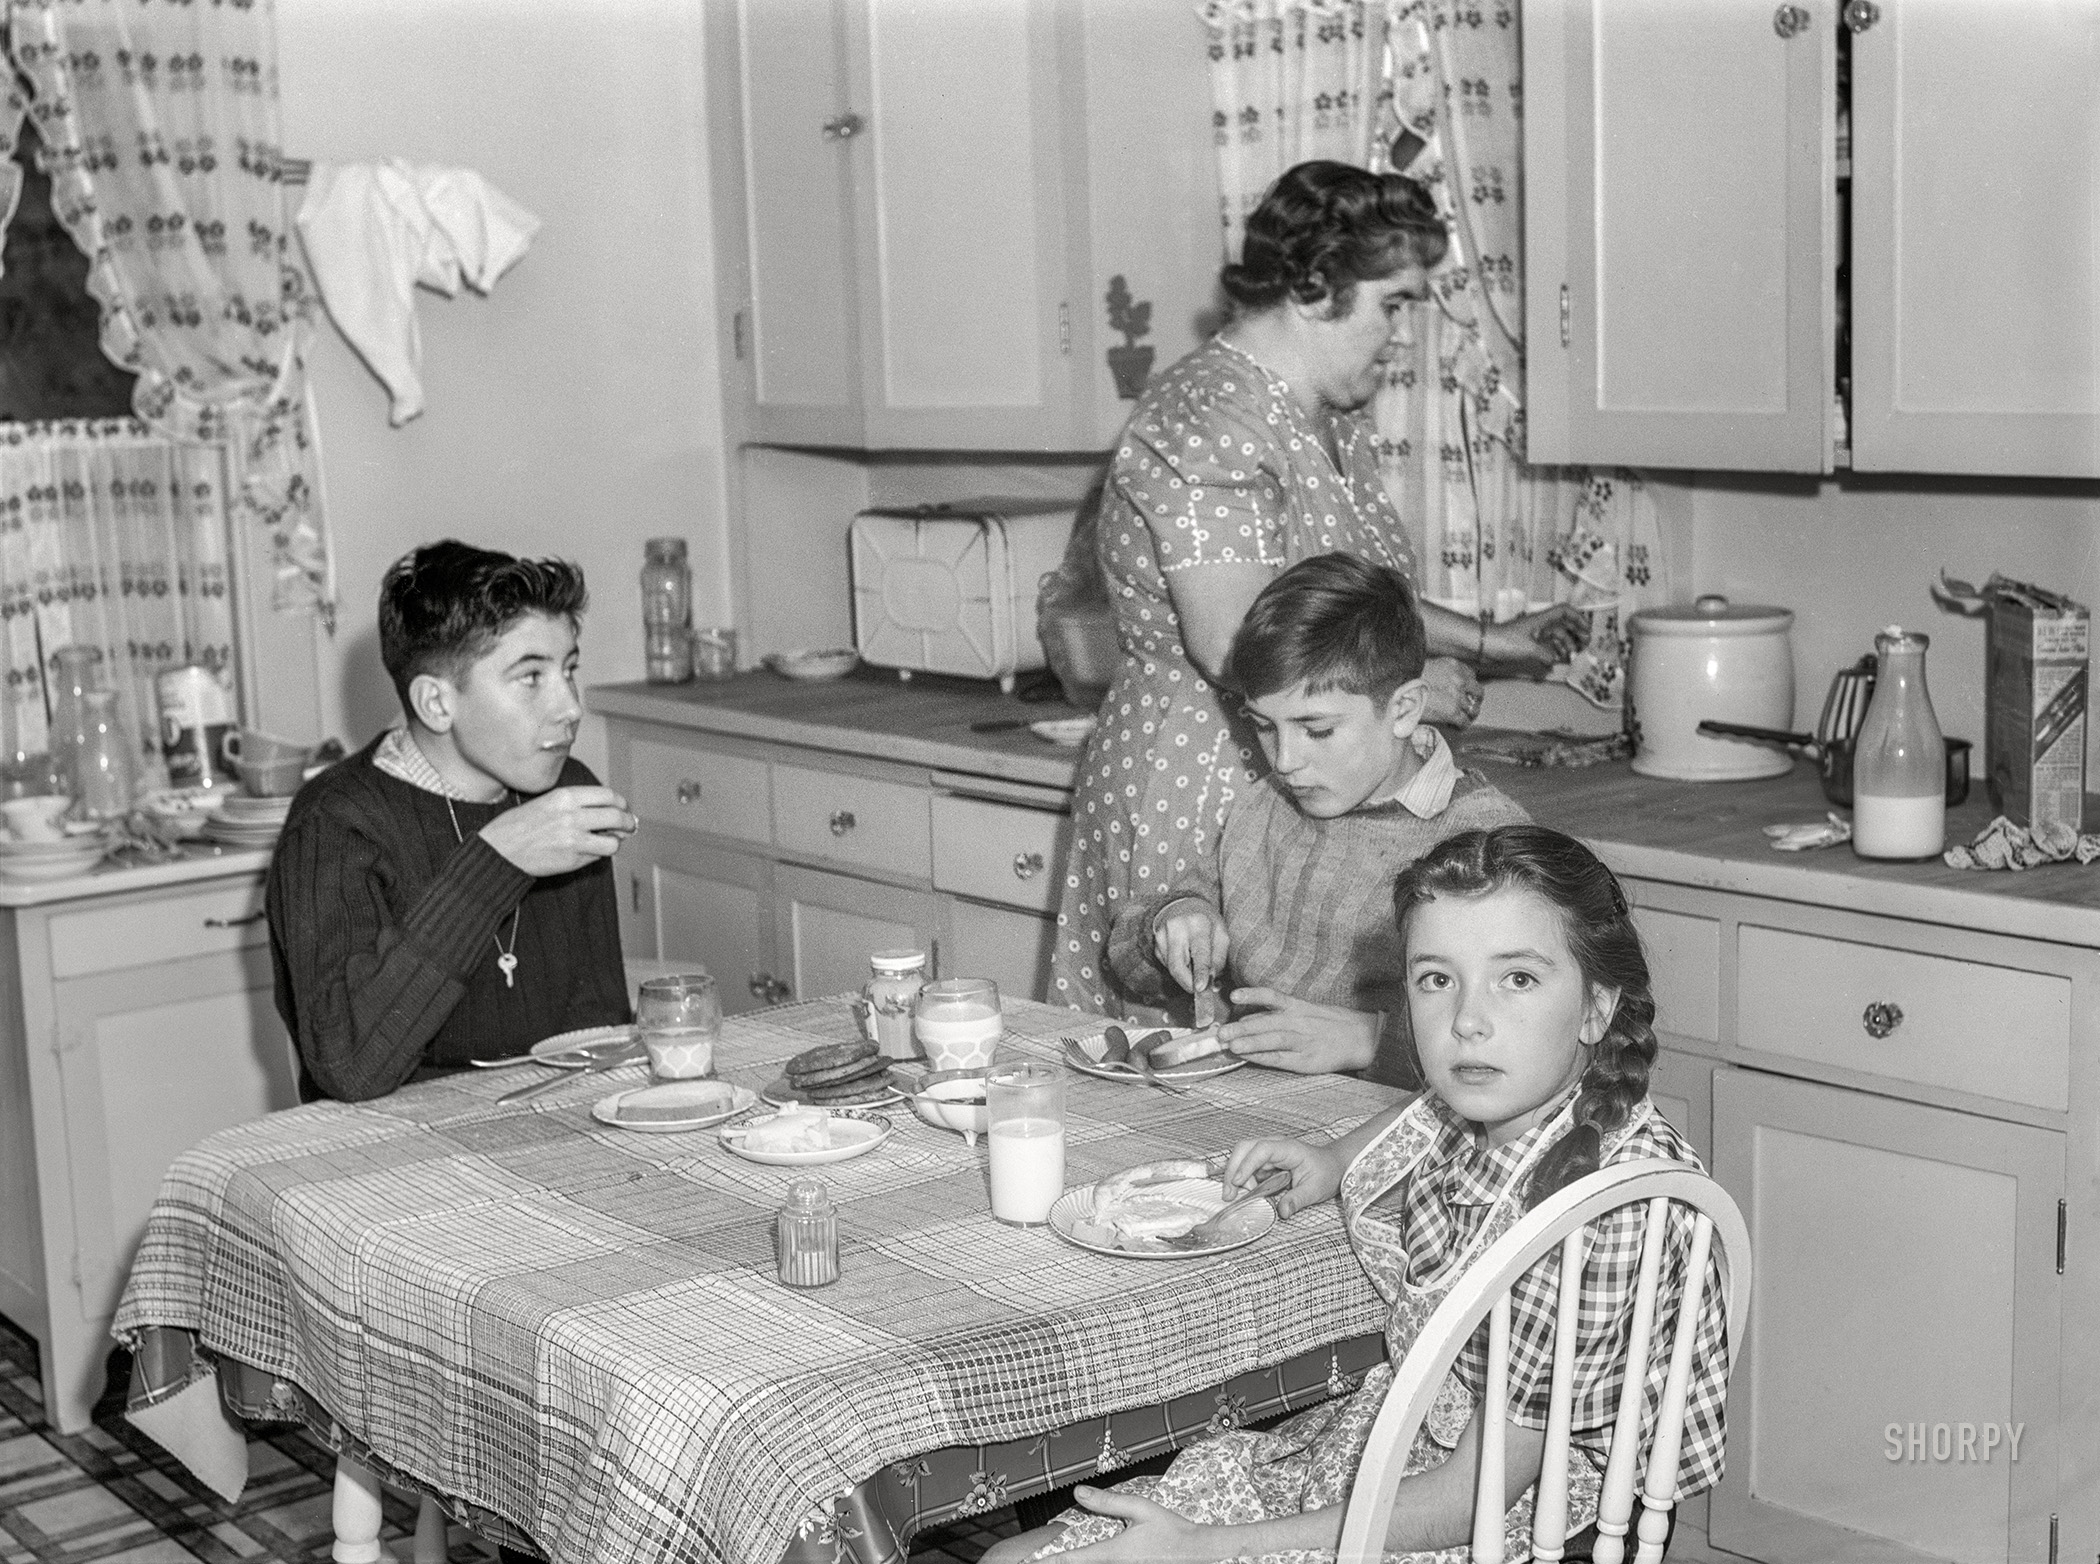 November 1940. Aberdeen, South Dakota. "Mrs. L.M. Schulstad and children in the kitchen. Mr. Schulstad is salesman for a hardware company." Photo by John Vachon. View full size.